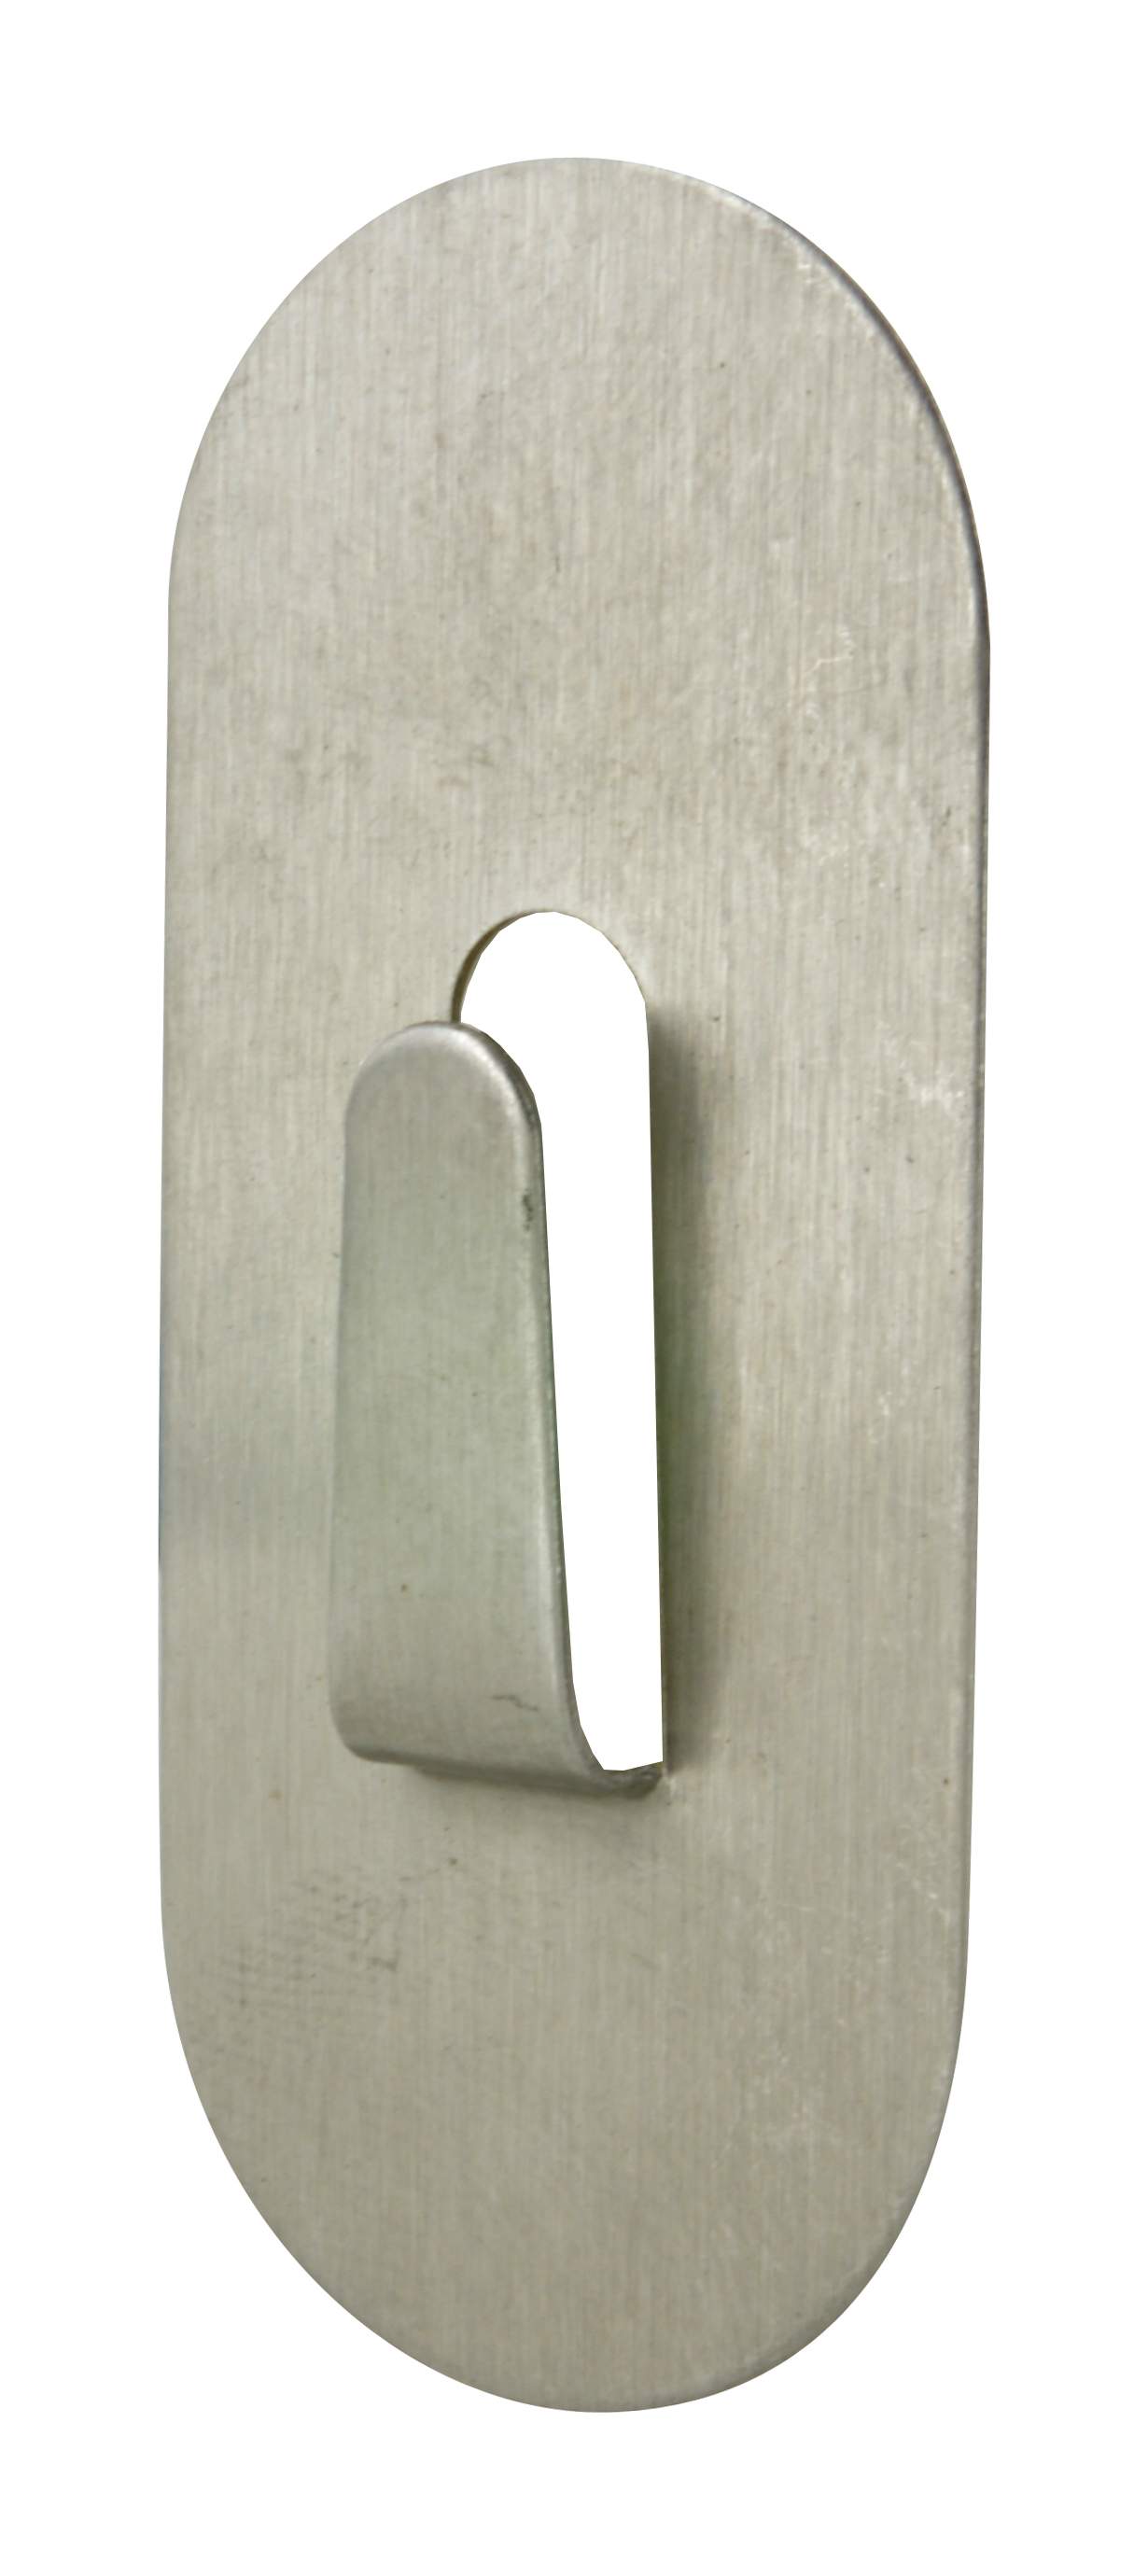 Adhesive hook H.60mm, W.25mm, stainless steel, 1 piece.